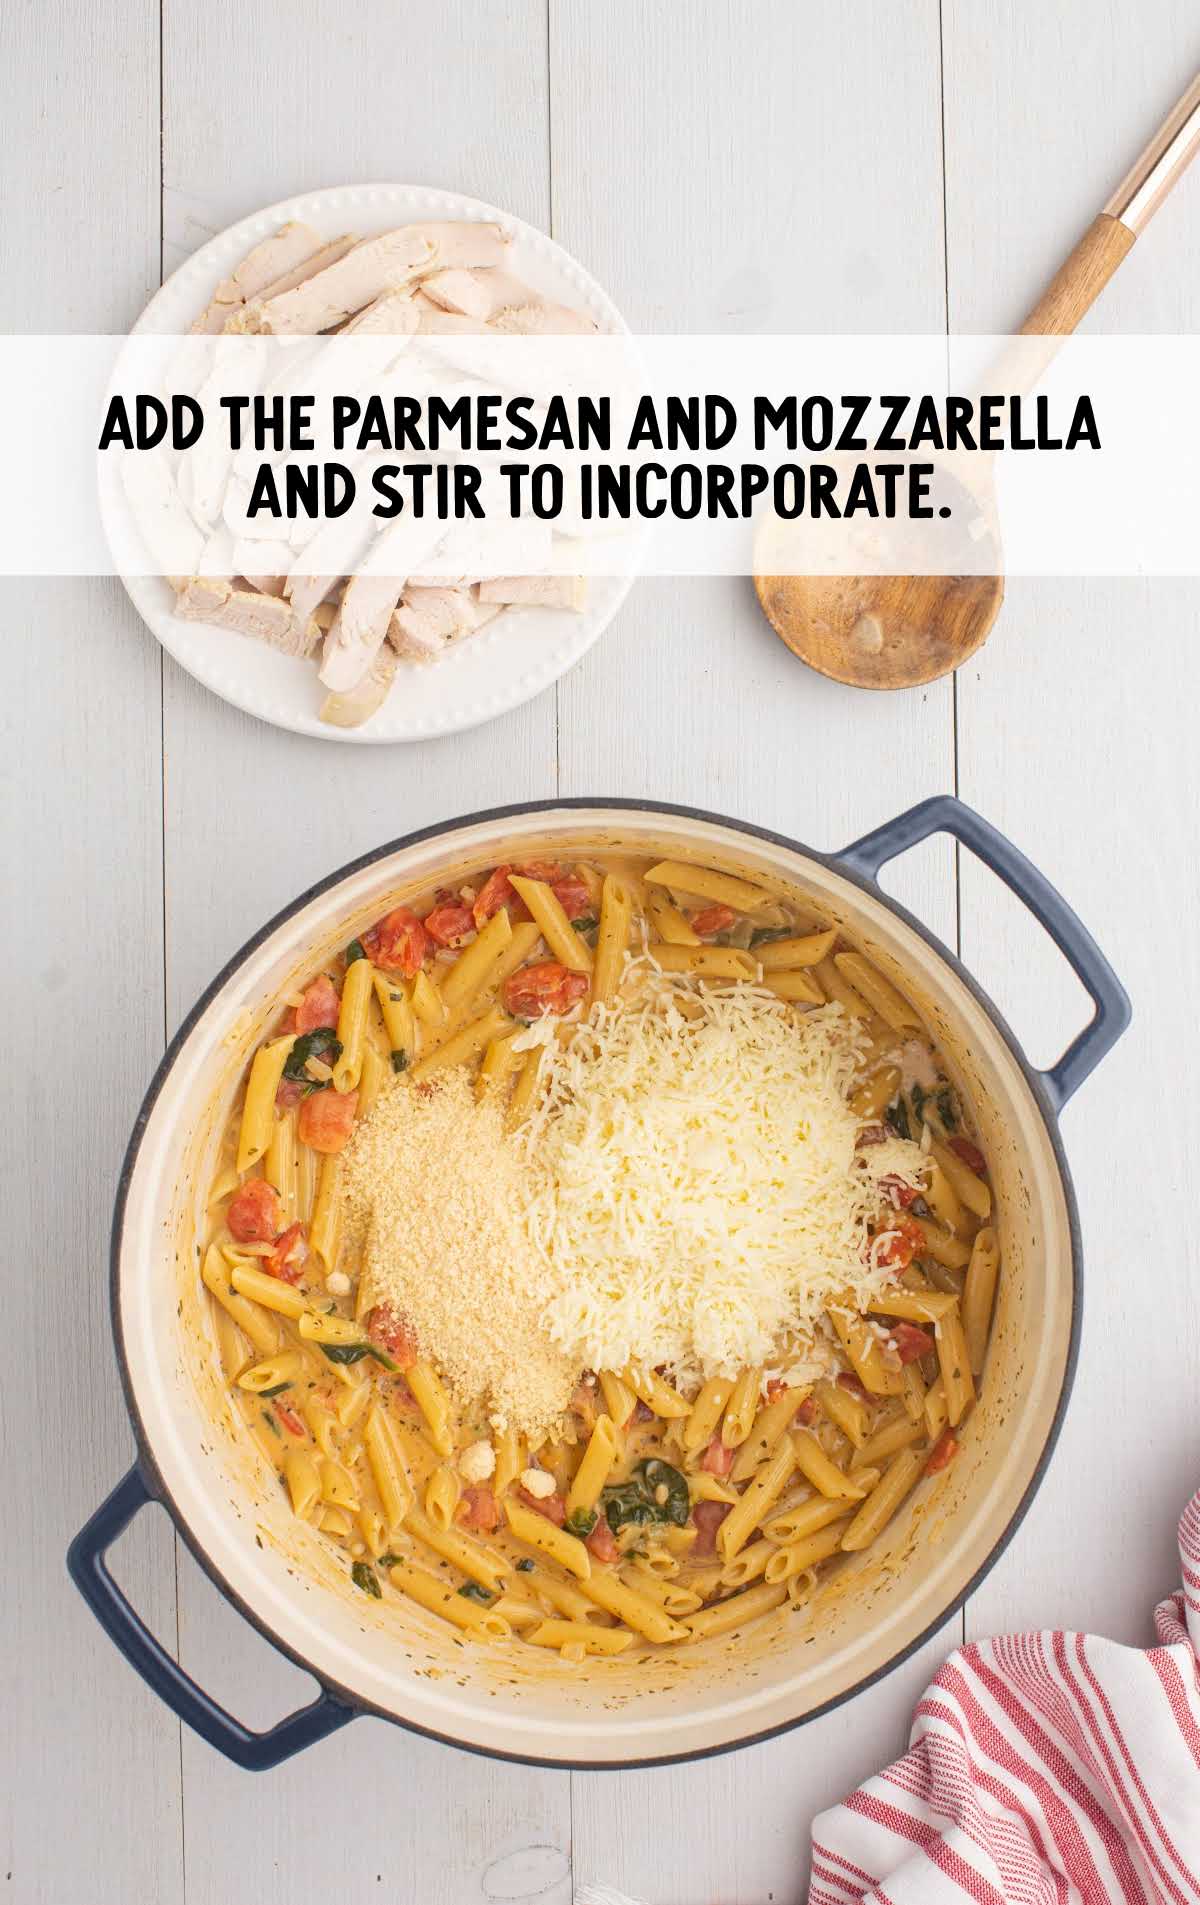 parmesan and mozzarella cheese added and stirred with the pasta ingredients